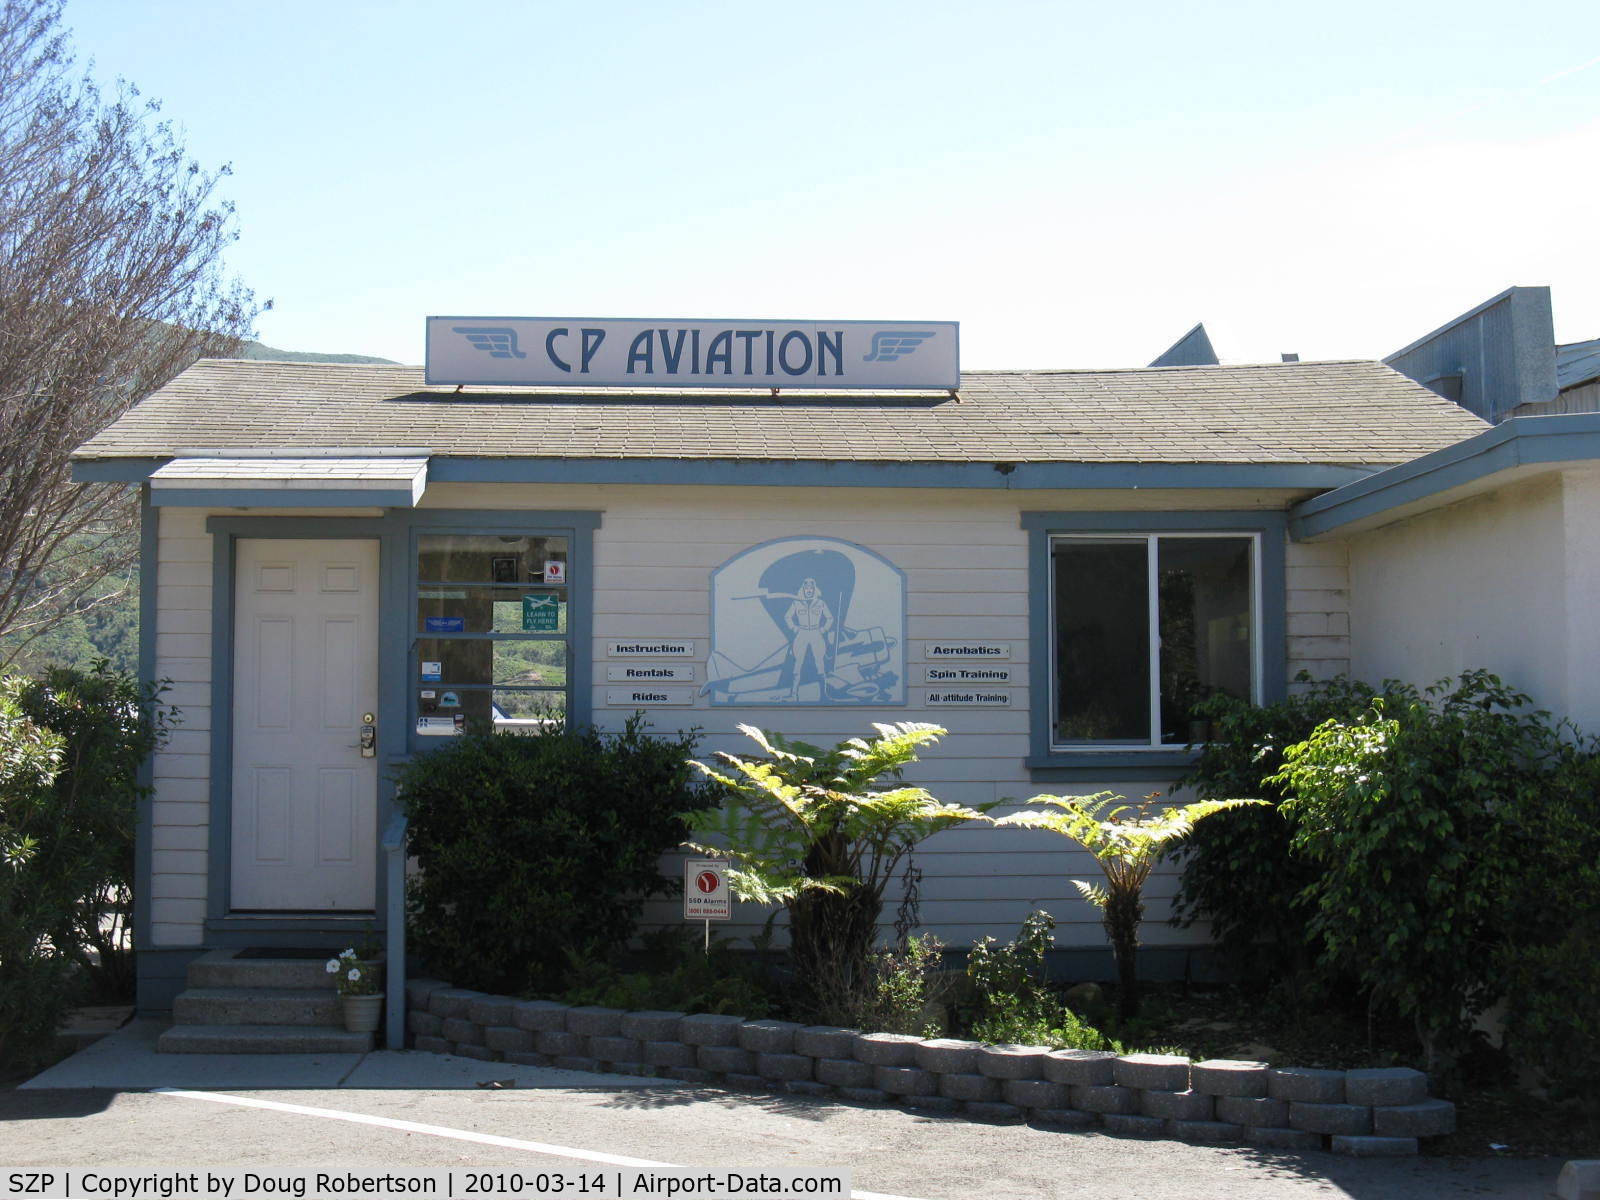 Santa Paula Airport (SZP) - CP Aviation, FBO offering aircraft maintenance, inspections, repair and flight training-specializing in tailwheel, aerobatics and advanced aerobatics. Aircraft rental and rides. 